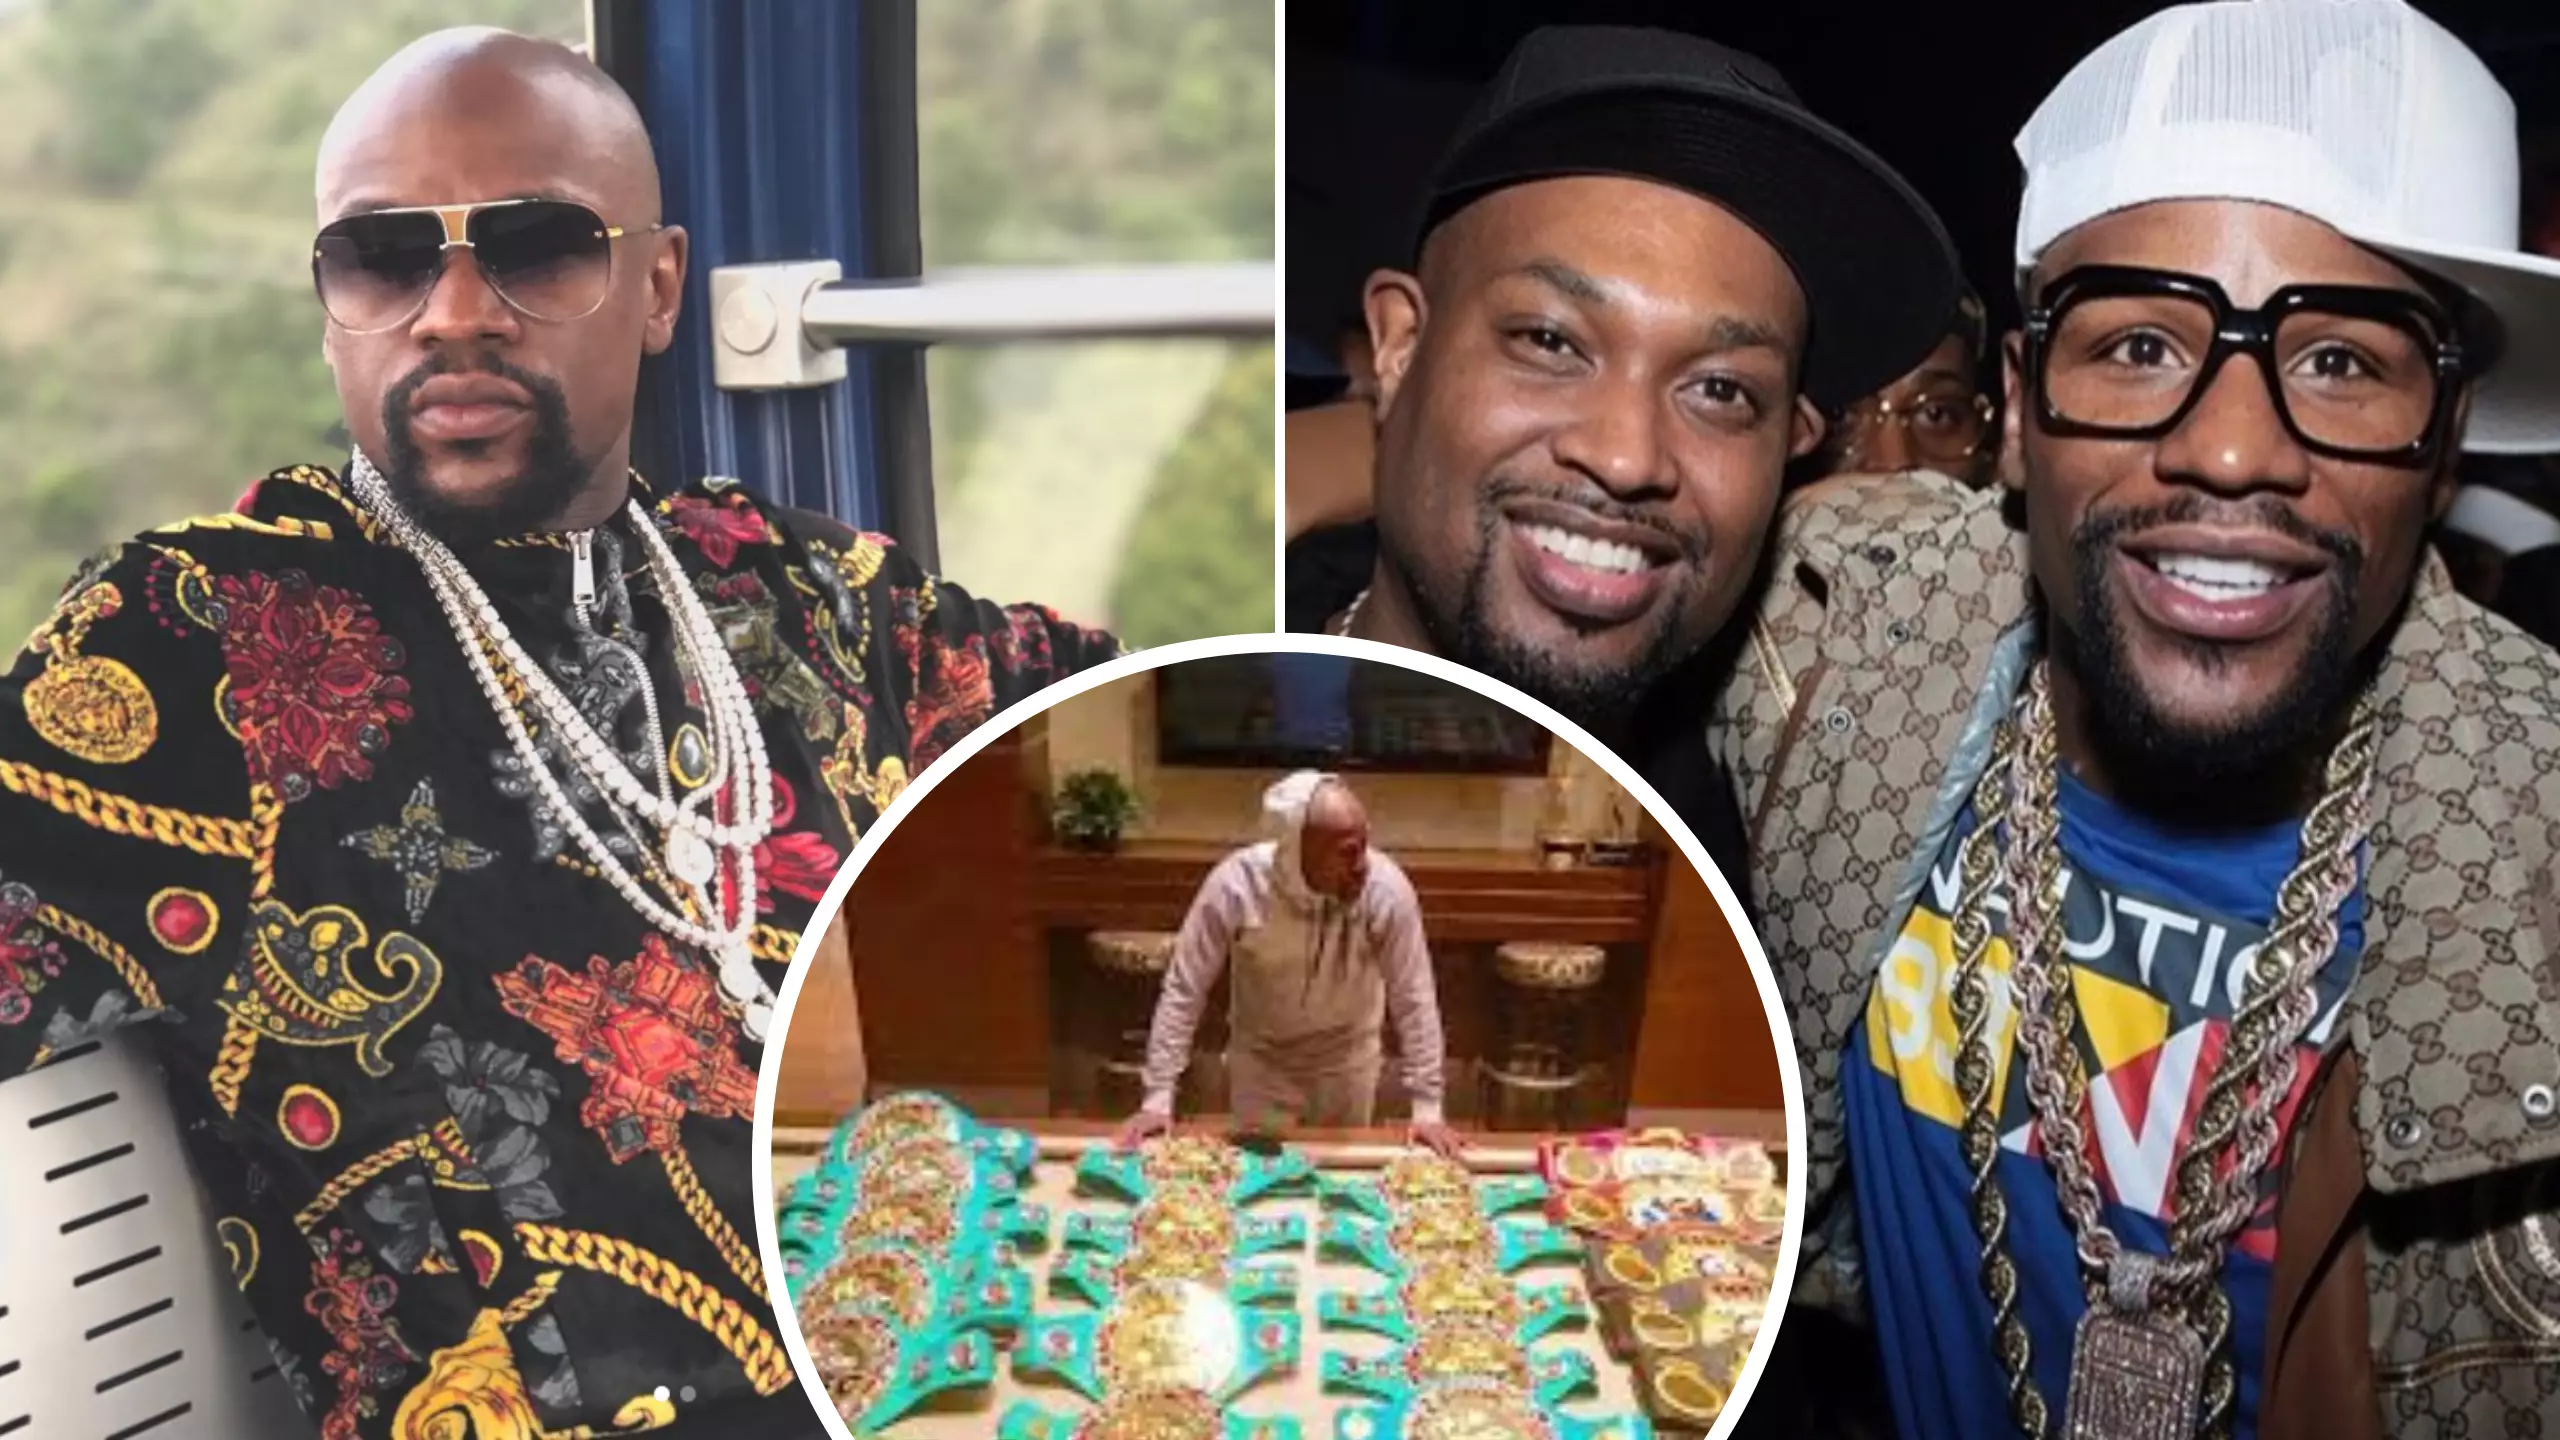 Former England International Explains How He Ended Up Partying At Floyd Mayweather's $9.5 Million Mansion